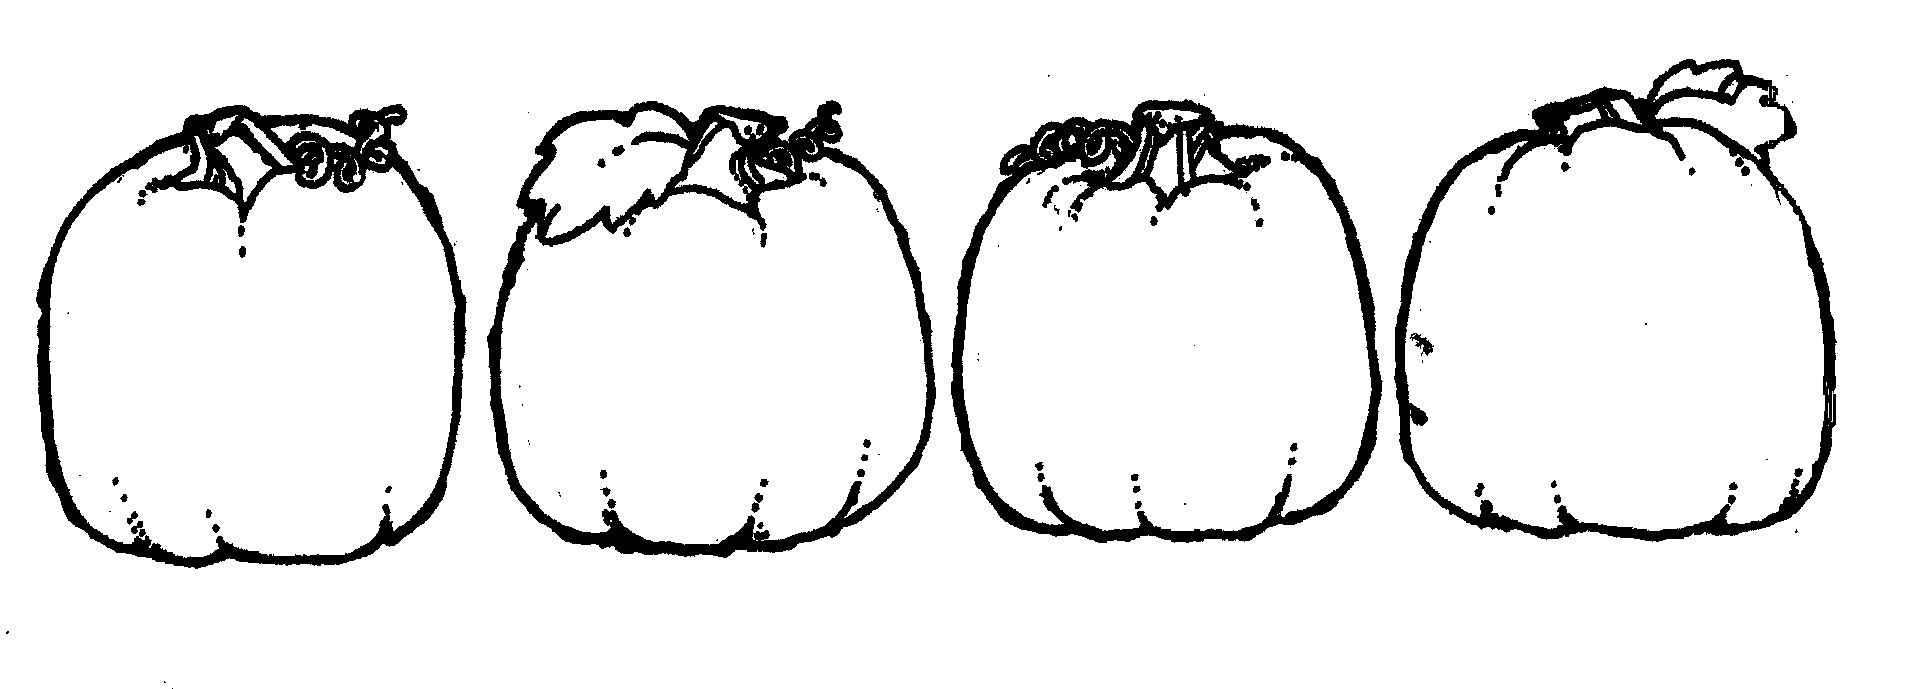 Pumpkin Patch Clipart Black And White   Clipart Panda   Free Clipart